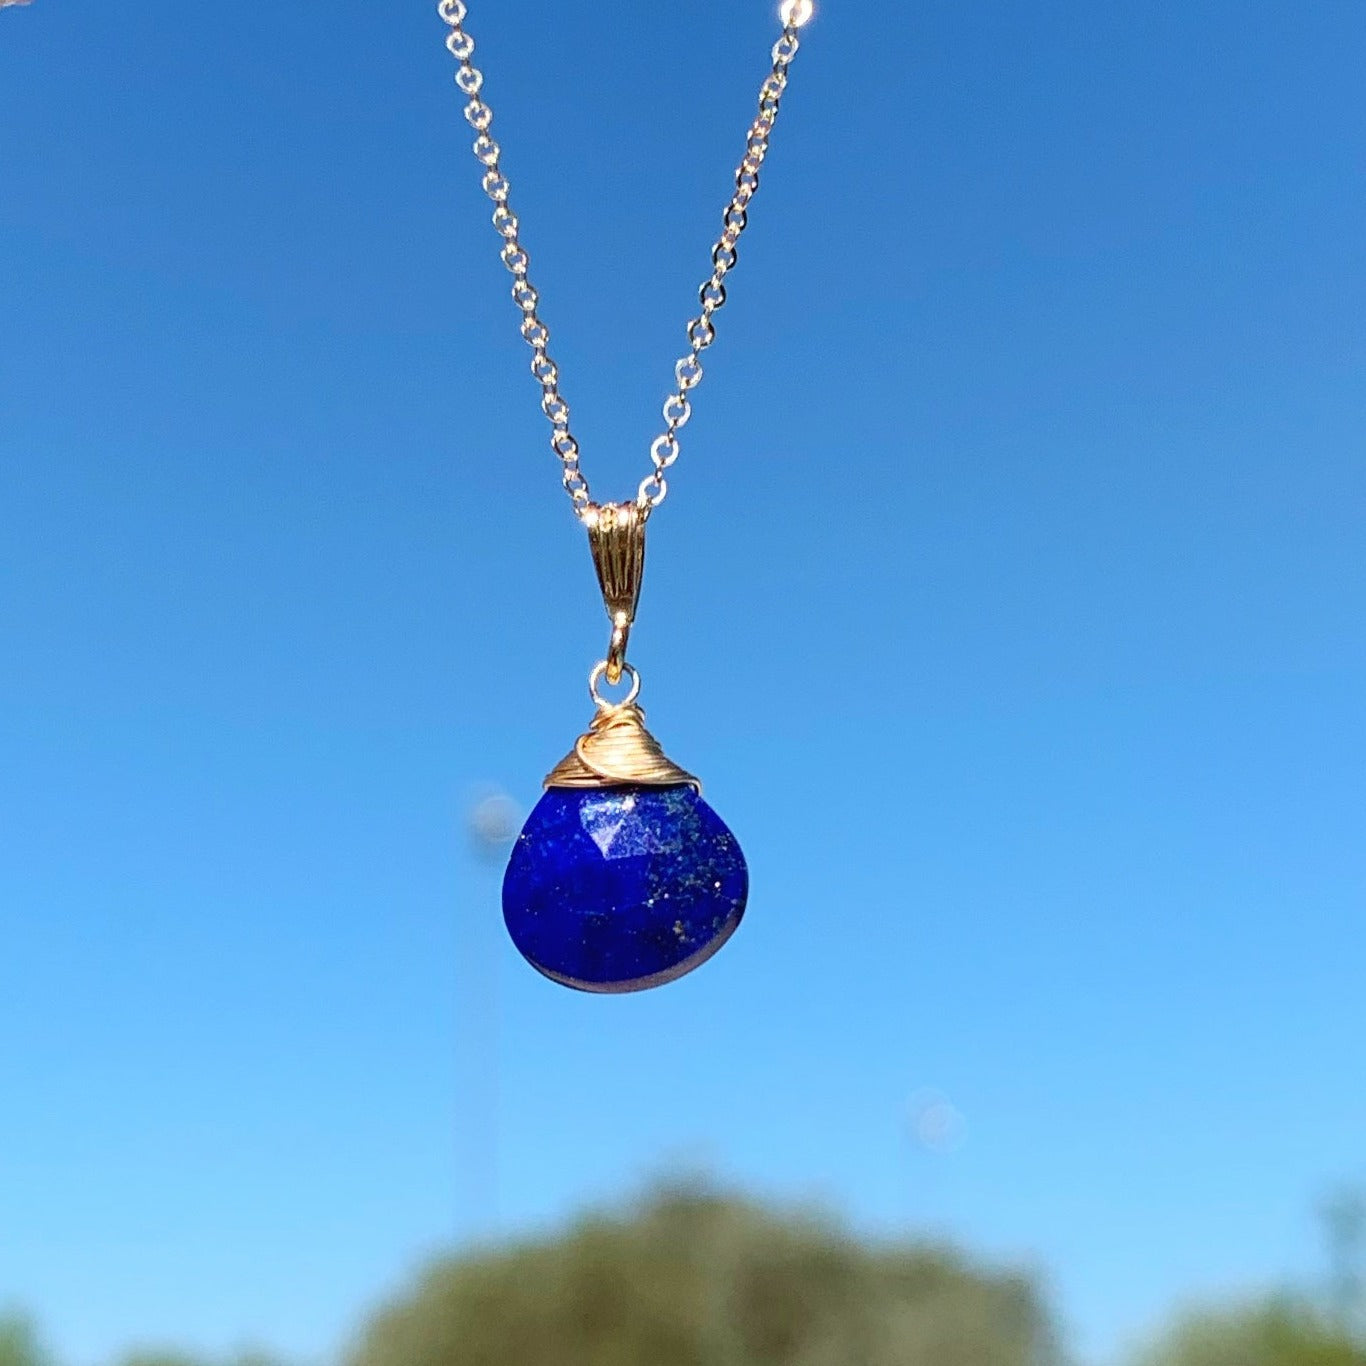 The neptune pendant necklace designed by mermaids and madeleines is created with blue lapis and 14k gold filled findings and chain. this necklace is suspended with blue sky in the background.